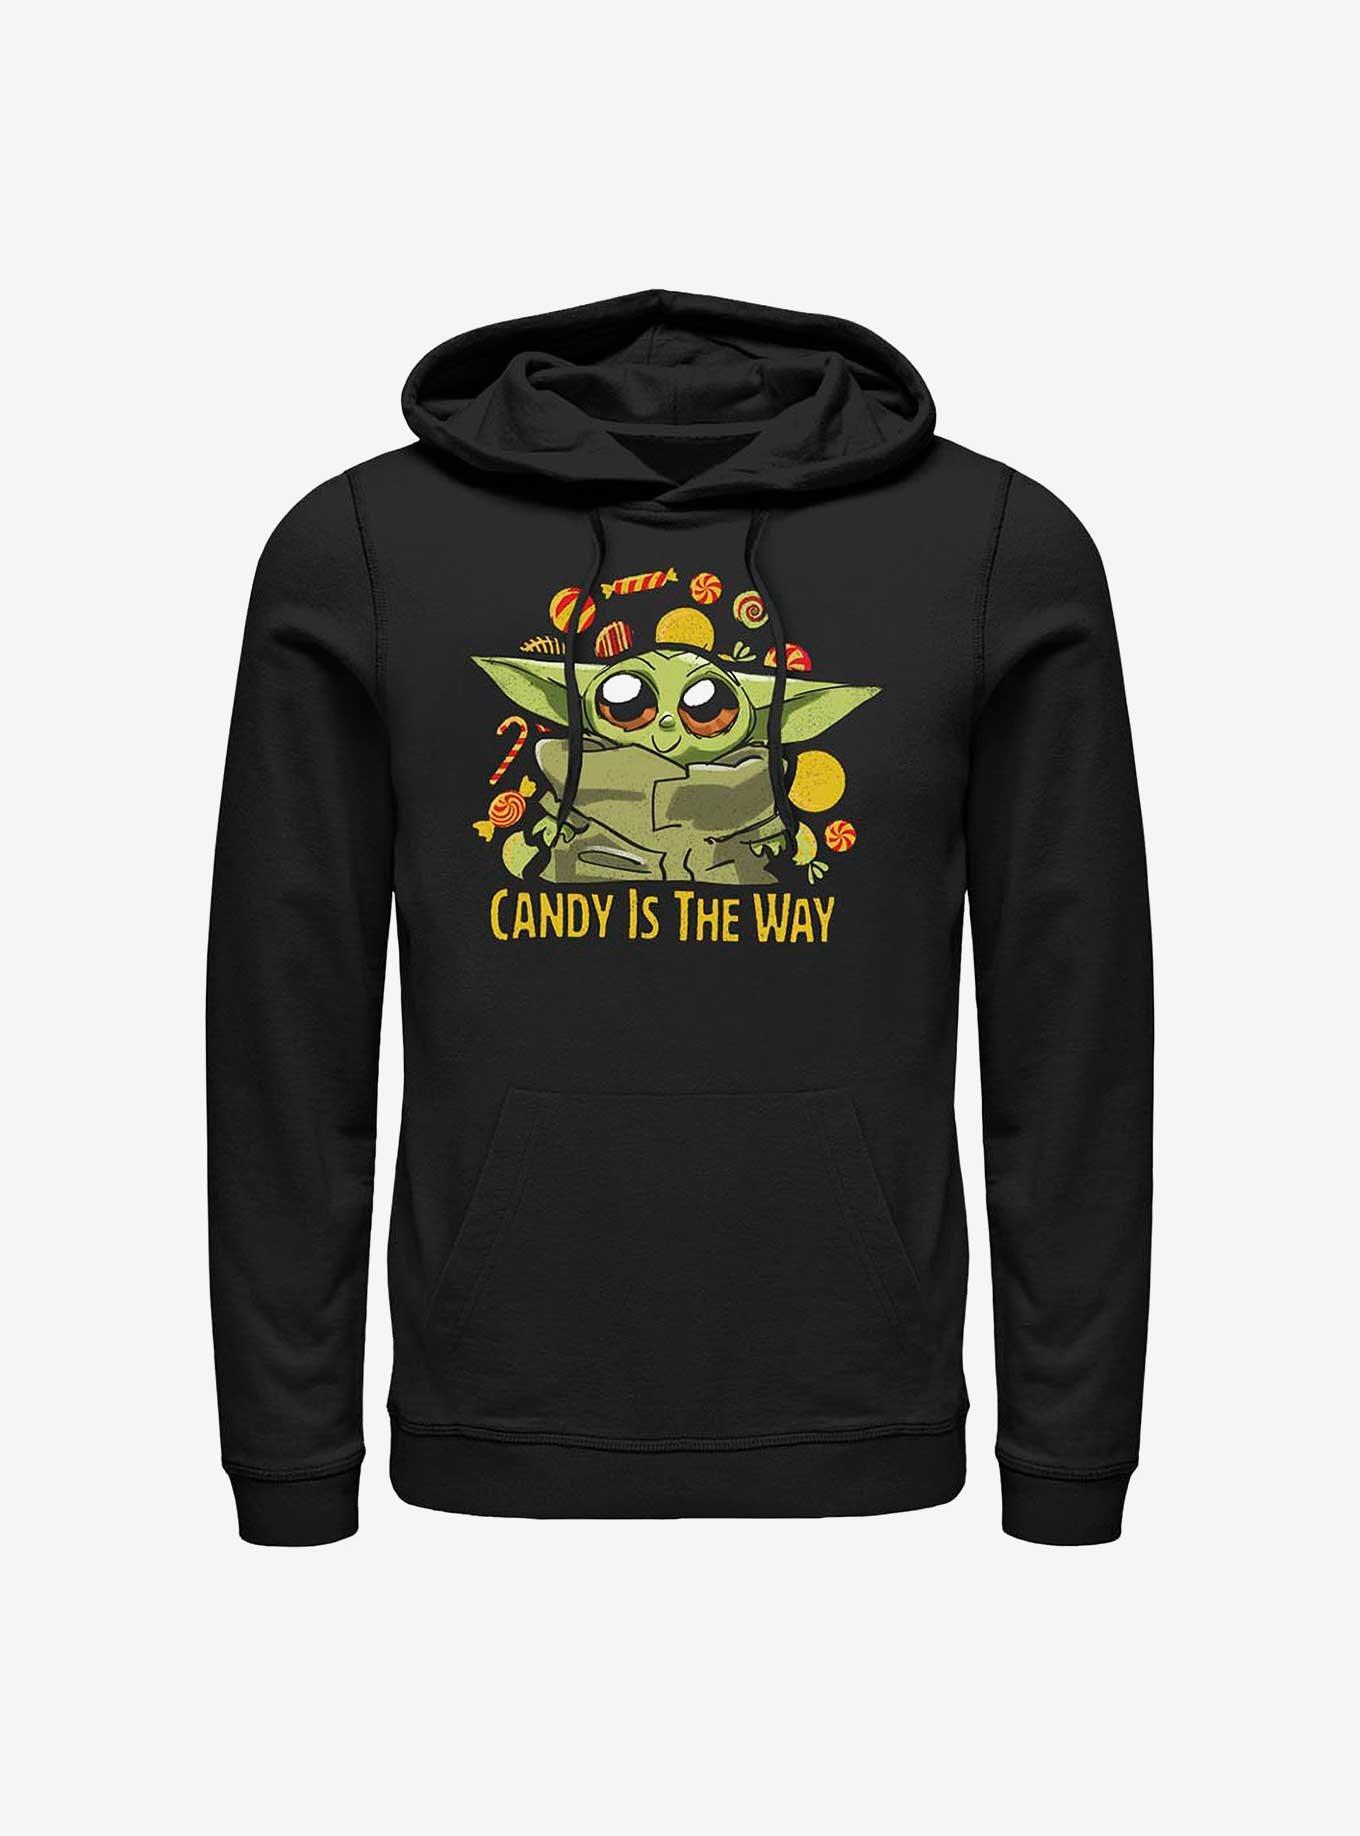 Star Wars The Mandalorian The Child Candy Is The Way Hoodie, BLACK, hi-res